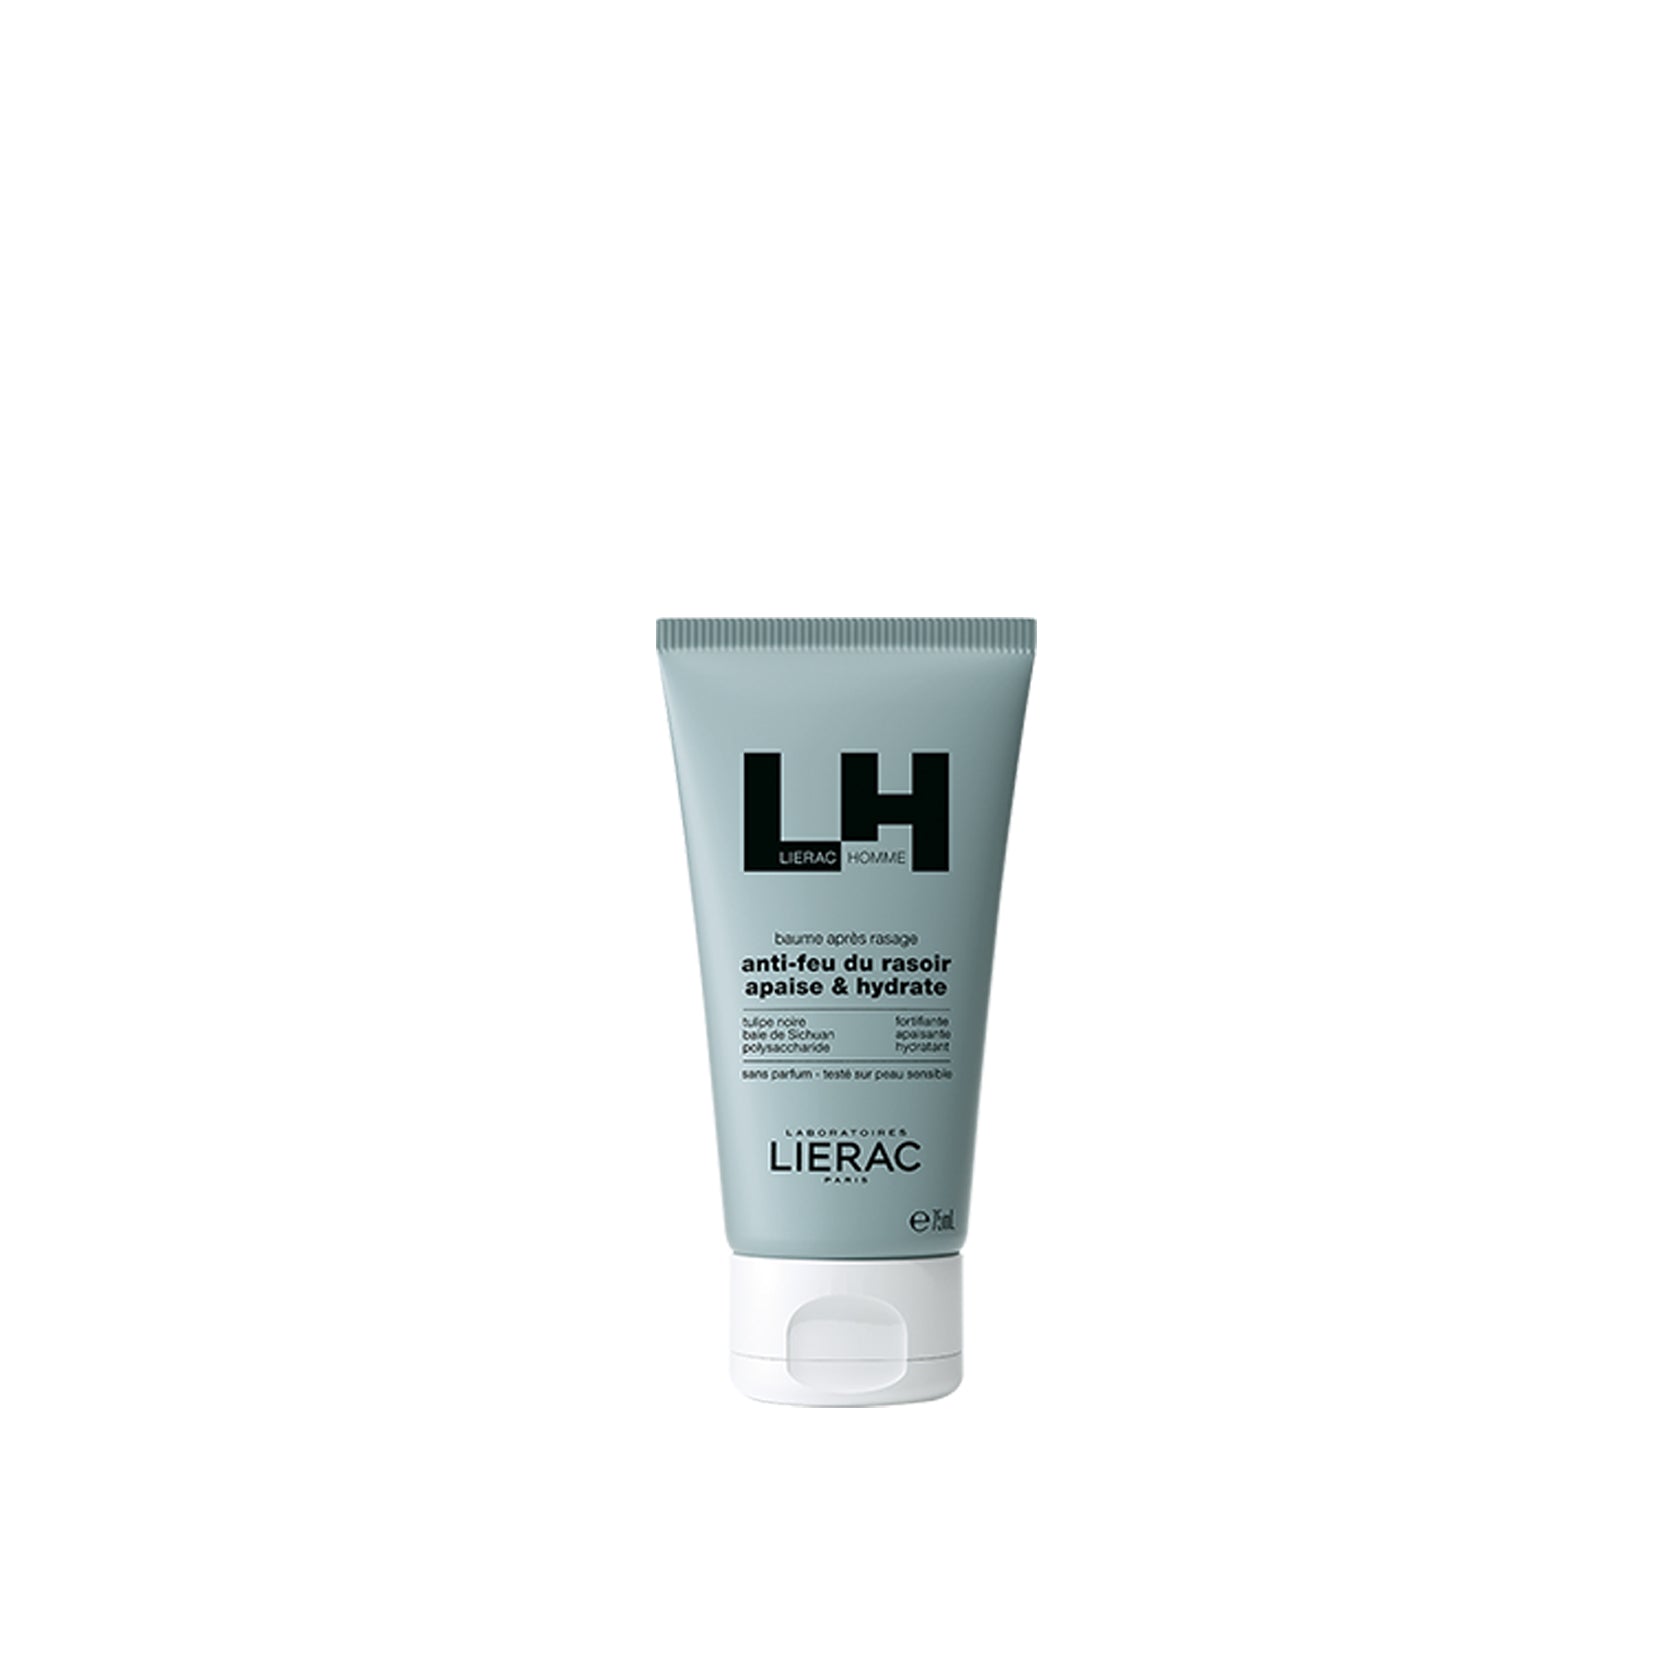 Lierac Homme After-Shave Soothing Balm 75ml